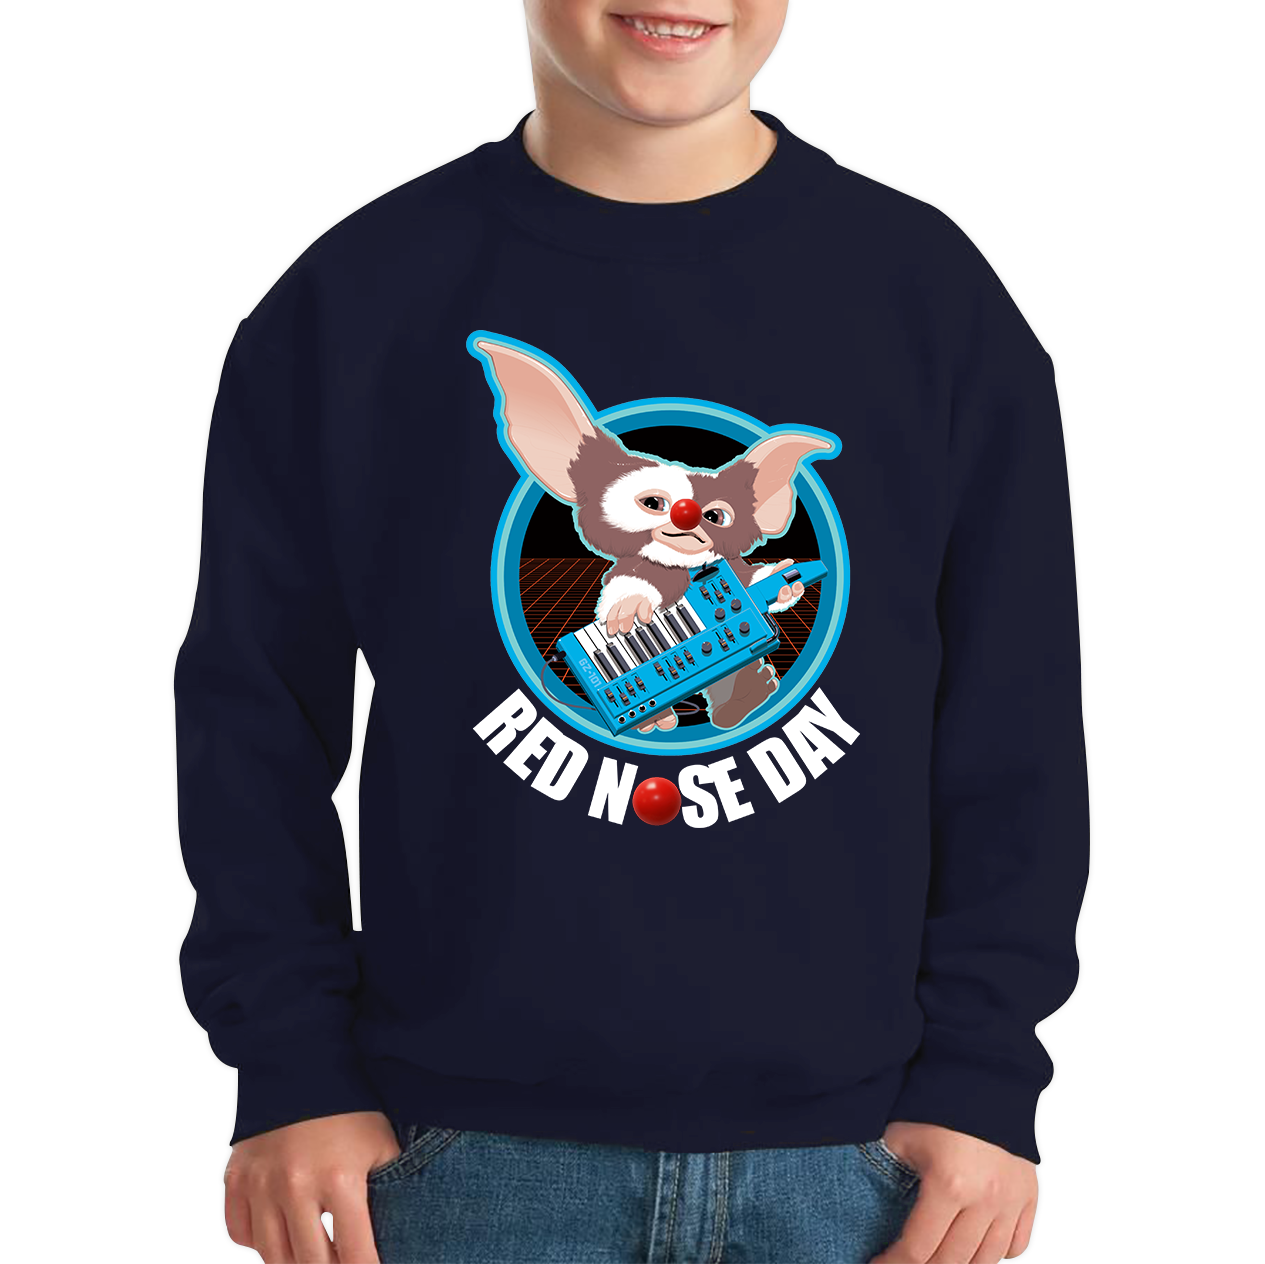 Gremlins Gizmo Piano Red Nose Day Kids Sweatshirt. 50% Goes To Charity